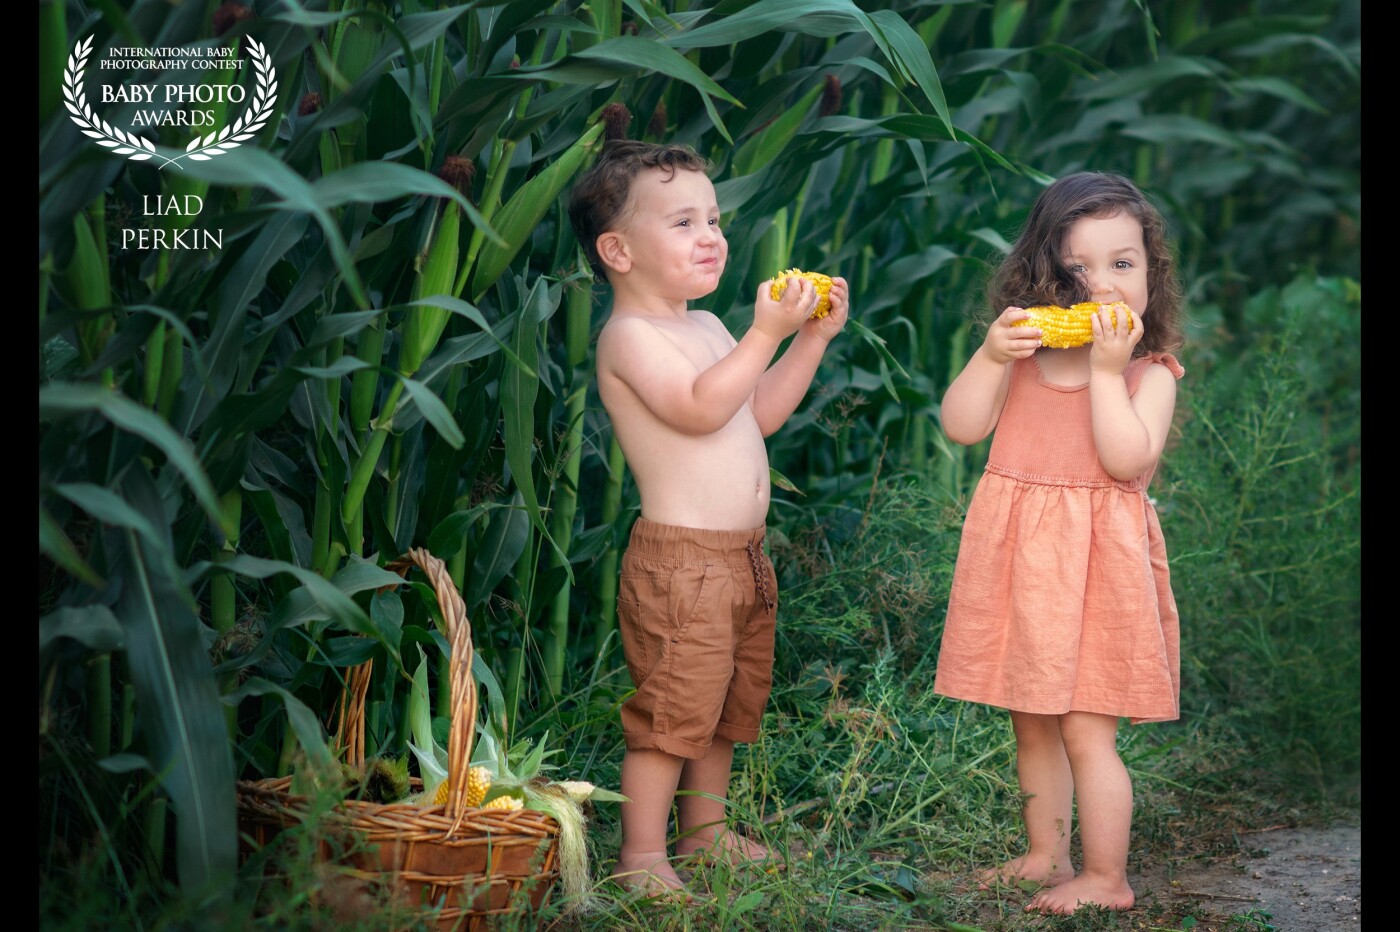 My Eitan & Aimee (2 years old).  A photo session in a corn field in the kibbutz. <br />
The Tarzan and Jane version 2018. 